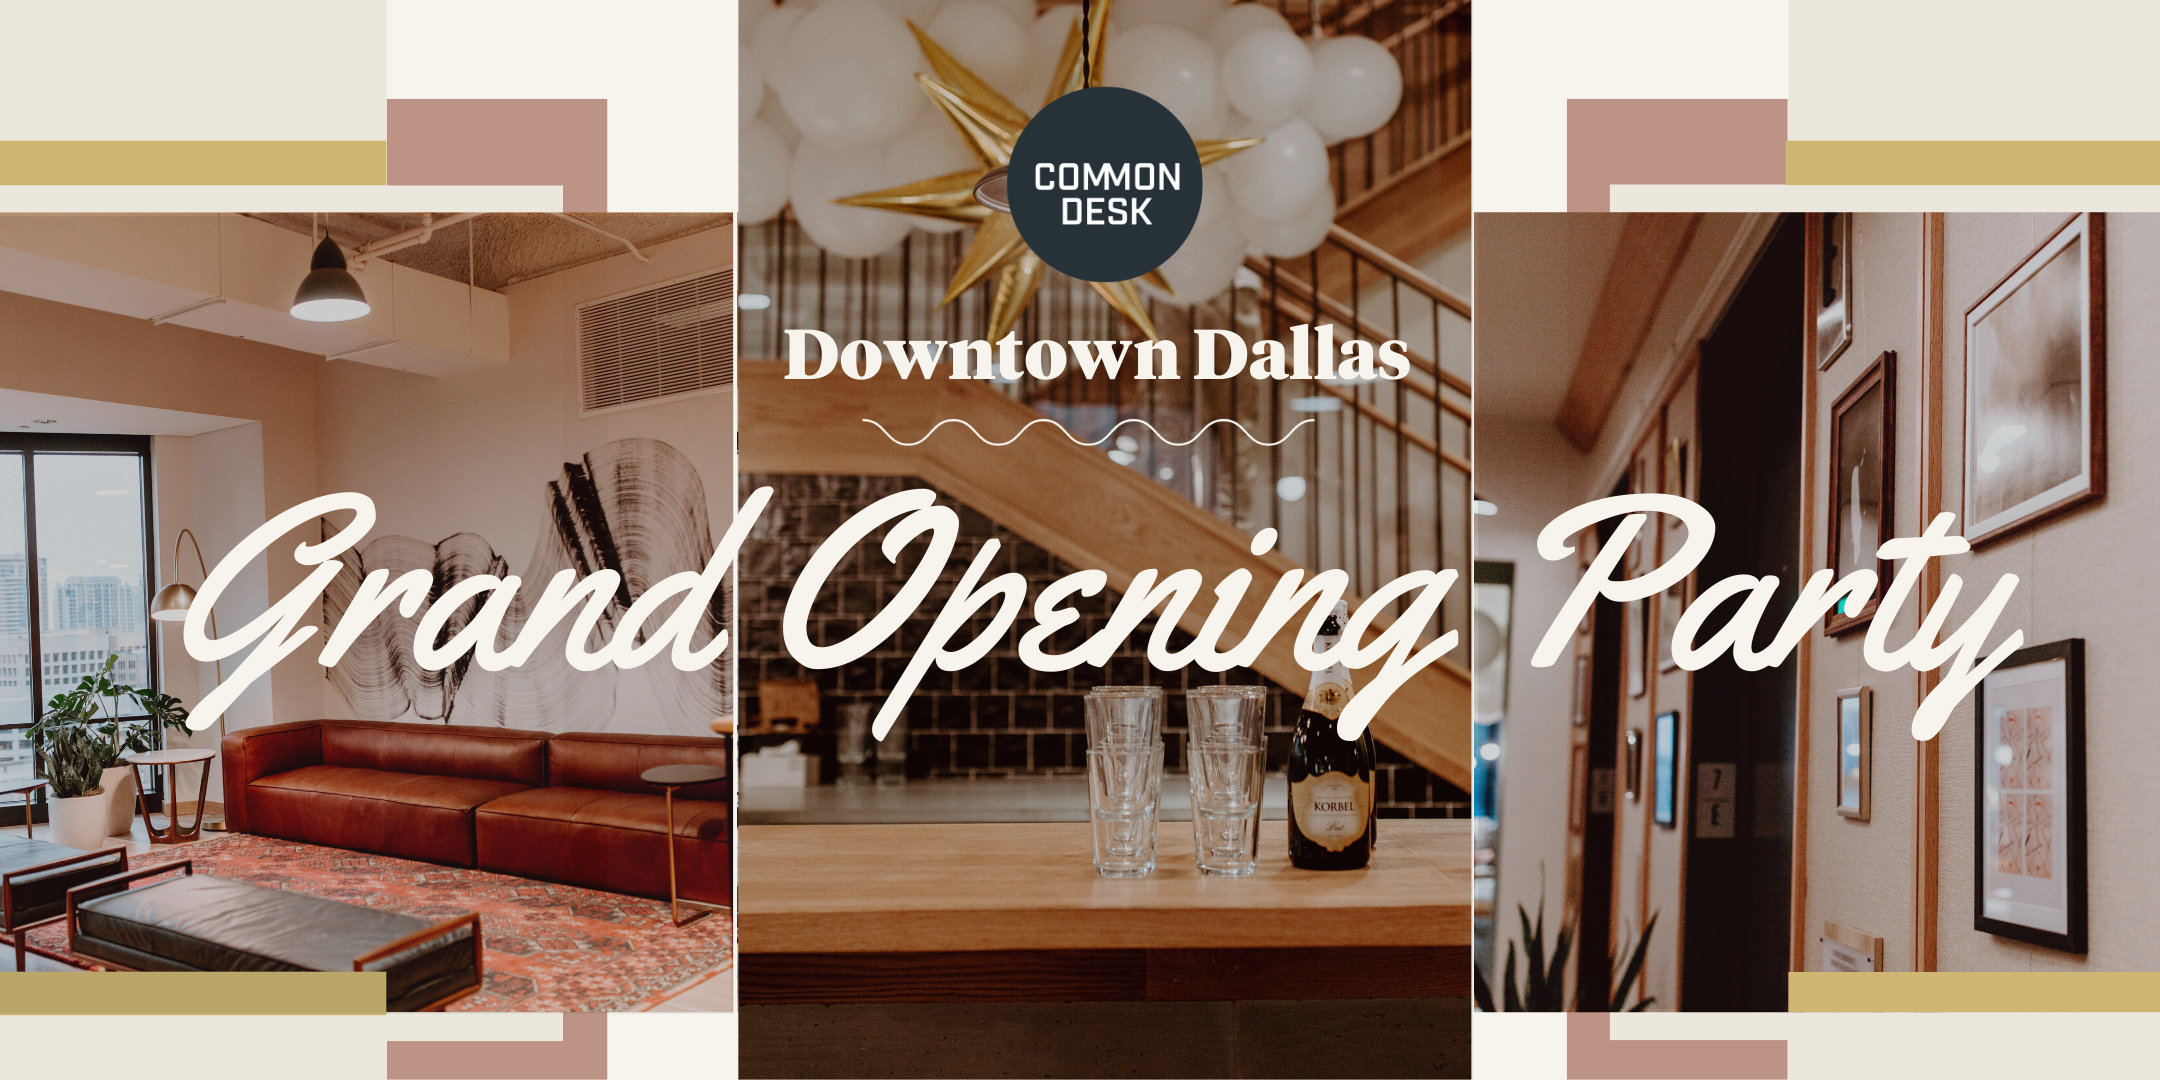 Common Desk - Downtown Dallas Grand Opening Party!